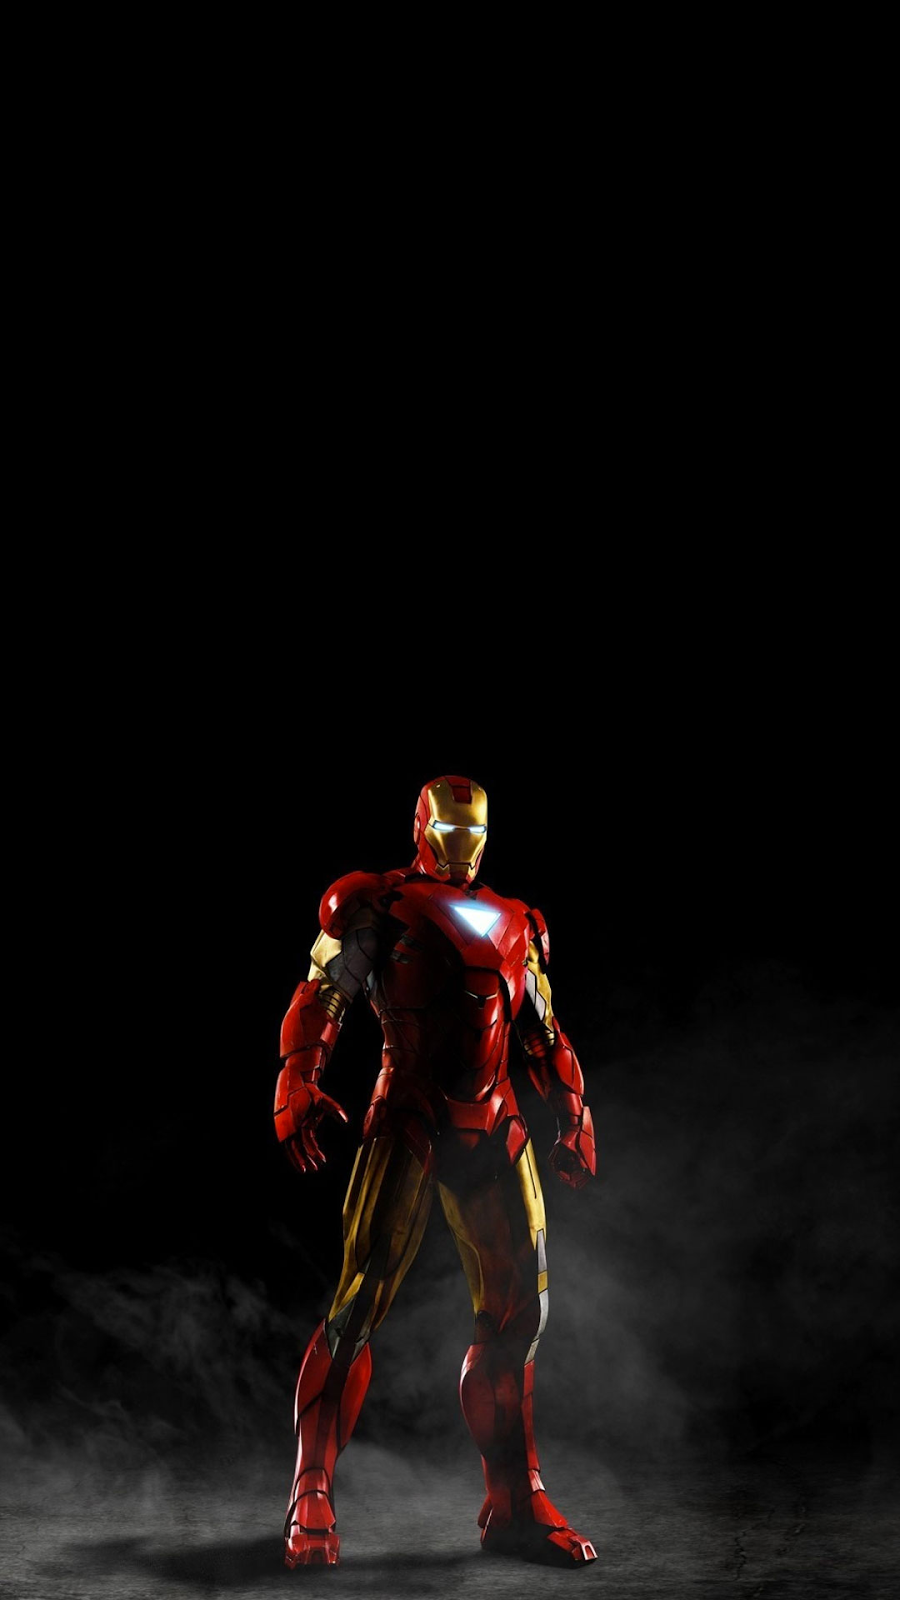 Be Linspired: Free iPhone 6 Wallpaper / Background. Iron man wallpaper, Man wallpaper, Iron man